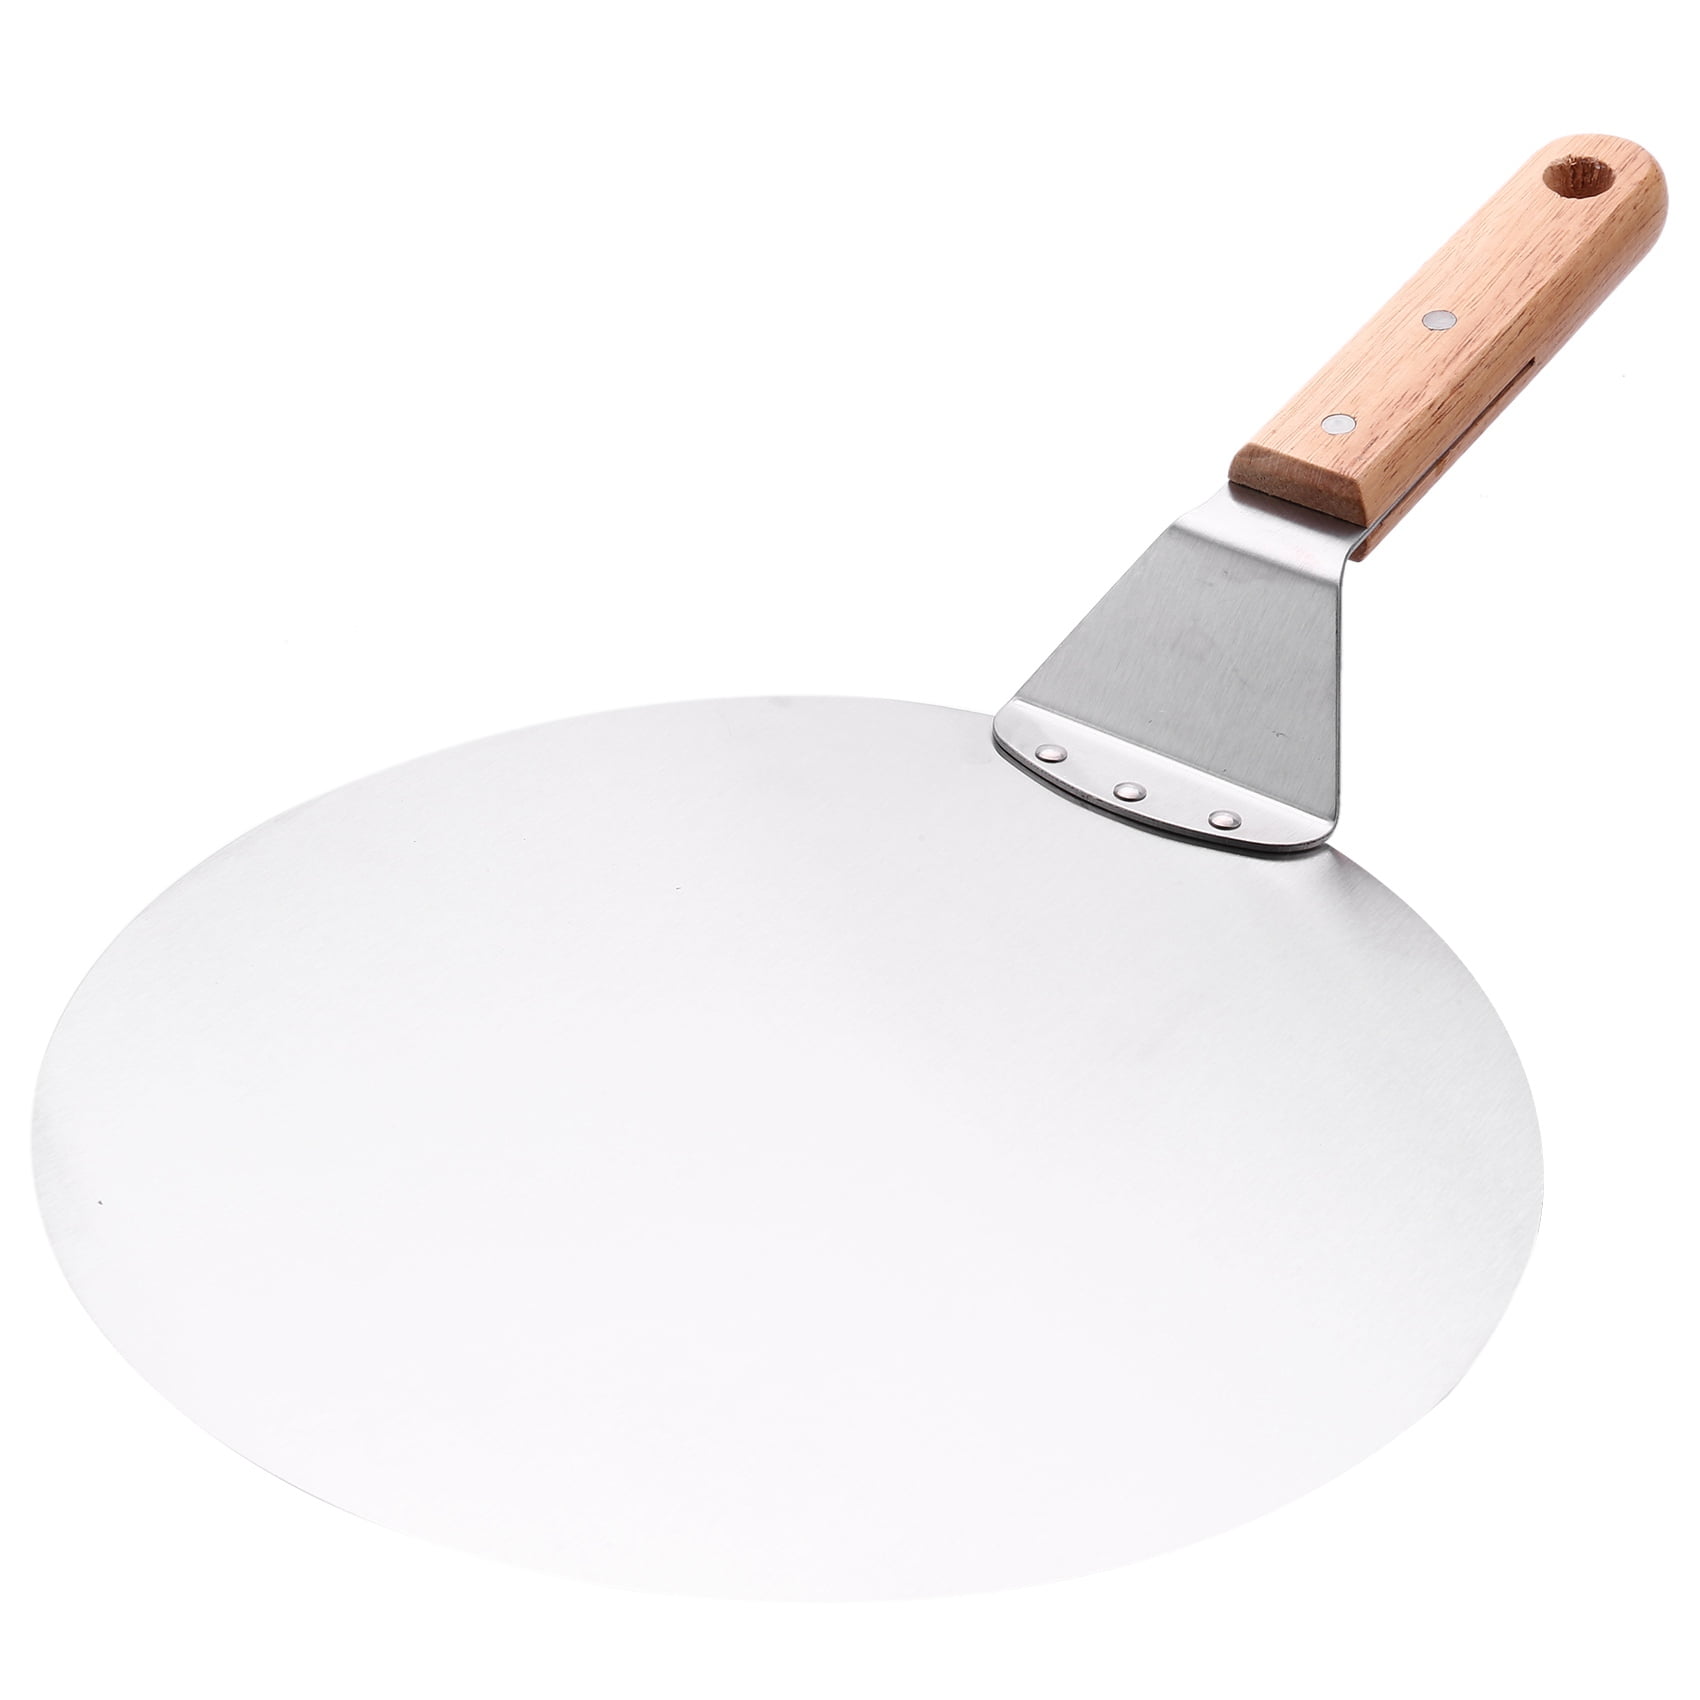 cakes and cheese etc. Pizza shovel-stainless steel pizza shovel with wooden non-slip handle suitable for pizza 